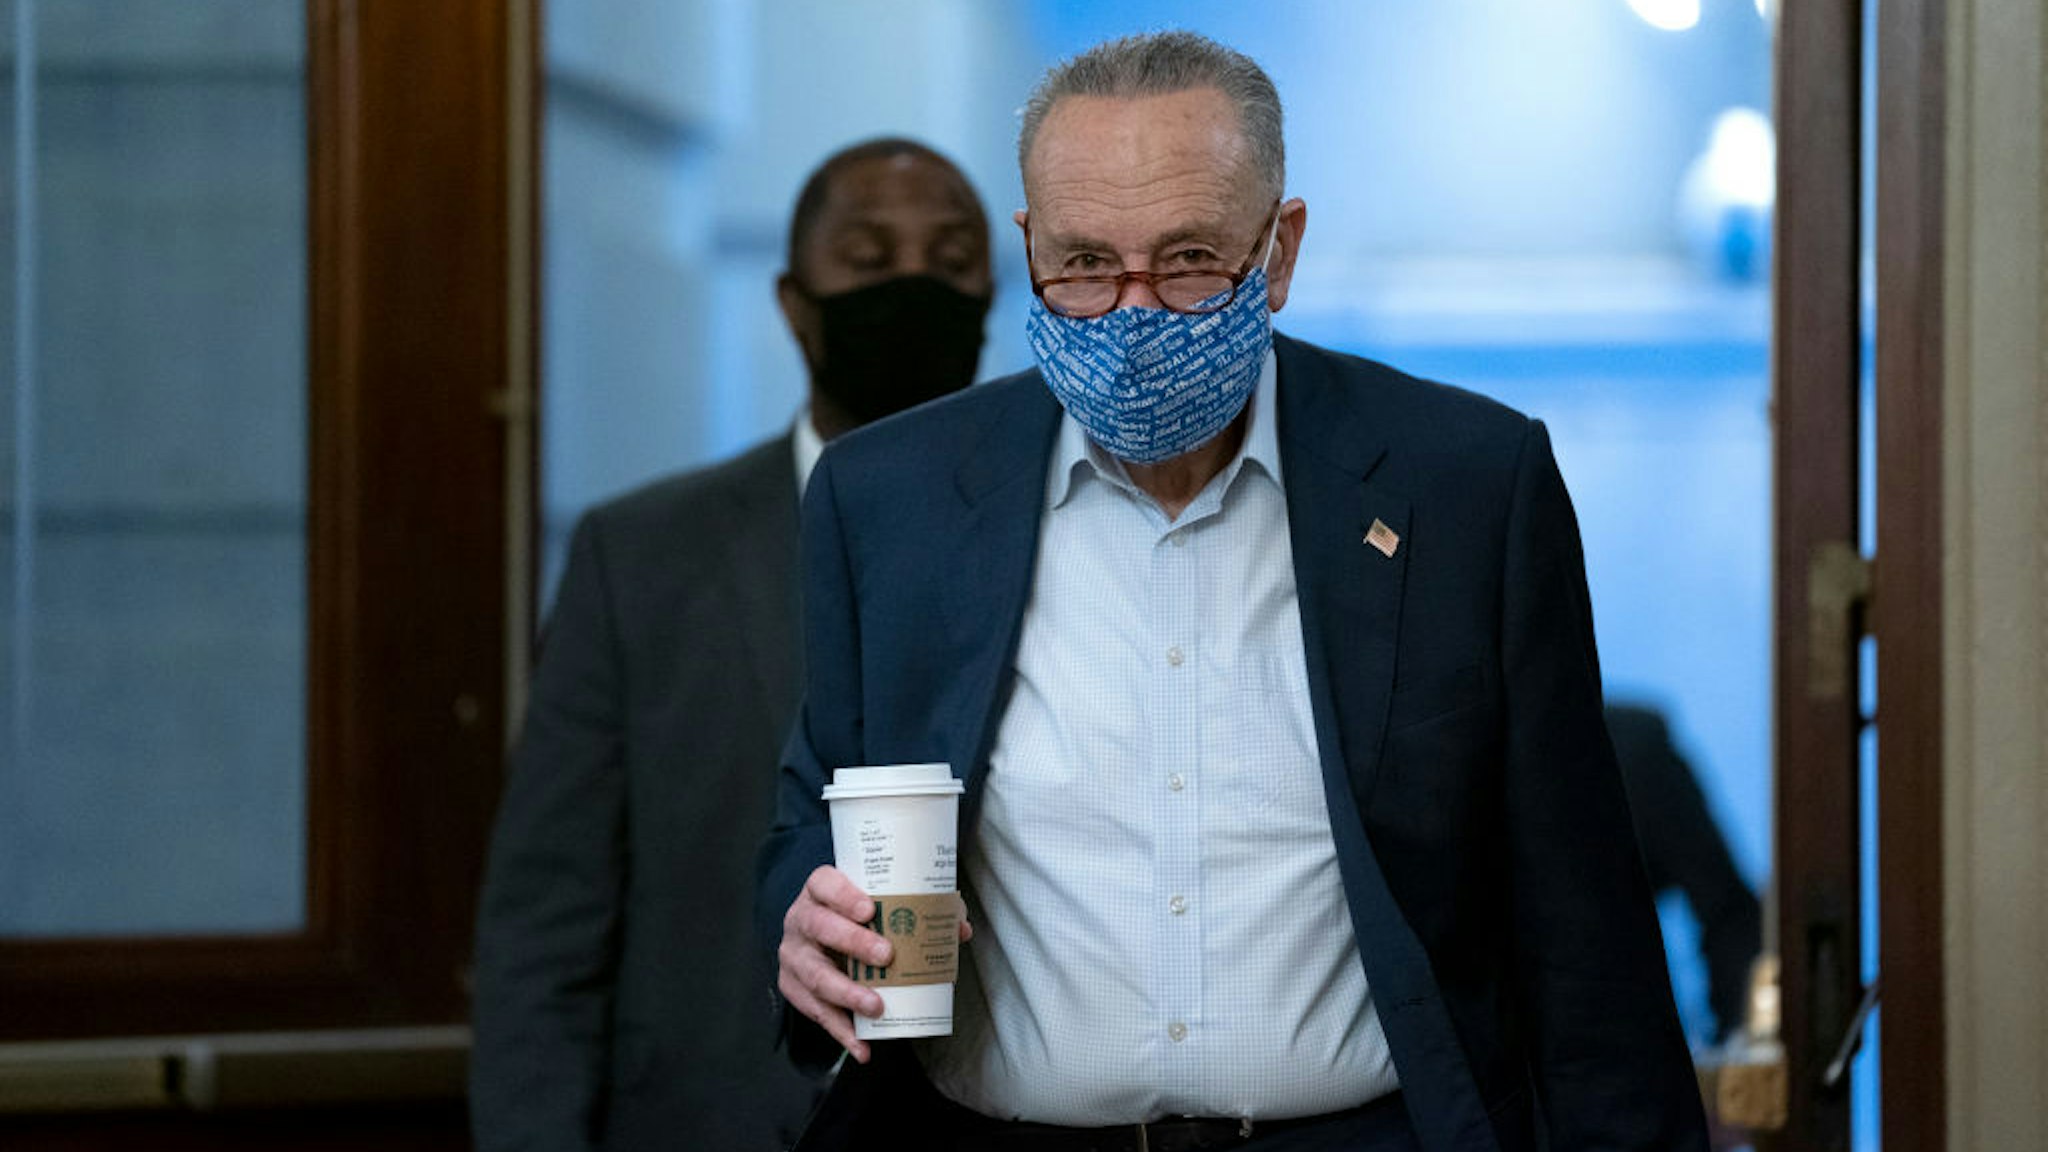 WASHINGTON, DC - OCTOBER 20: U.S. Senate Minority Leader Chuck Schumer (D-NY), right, wears a protective mask as he arrives to the U.S. Capitol on October 20, 2020 in Washington, DC. Senate Republicans are looking to hold a confirmation vote for Supreme Court nominee Amy Coney Barrett on Monday, October 26, approximately one week before the Presidential election.(Photo by Stefani Reynolds/Getty Images)